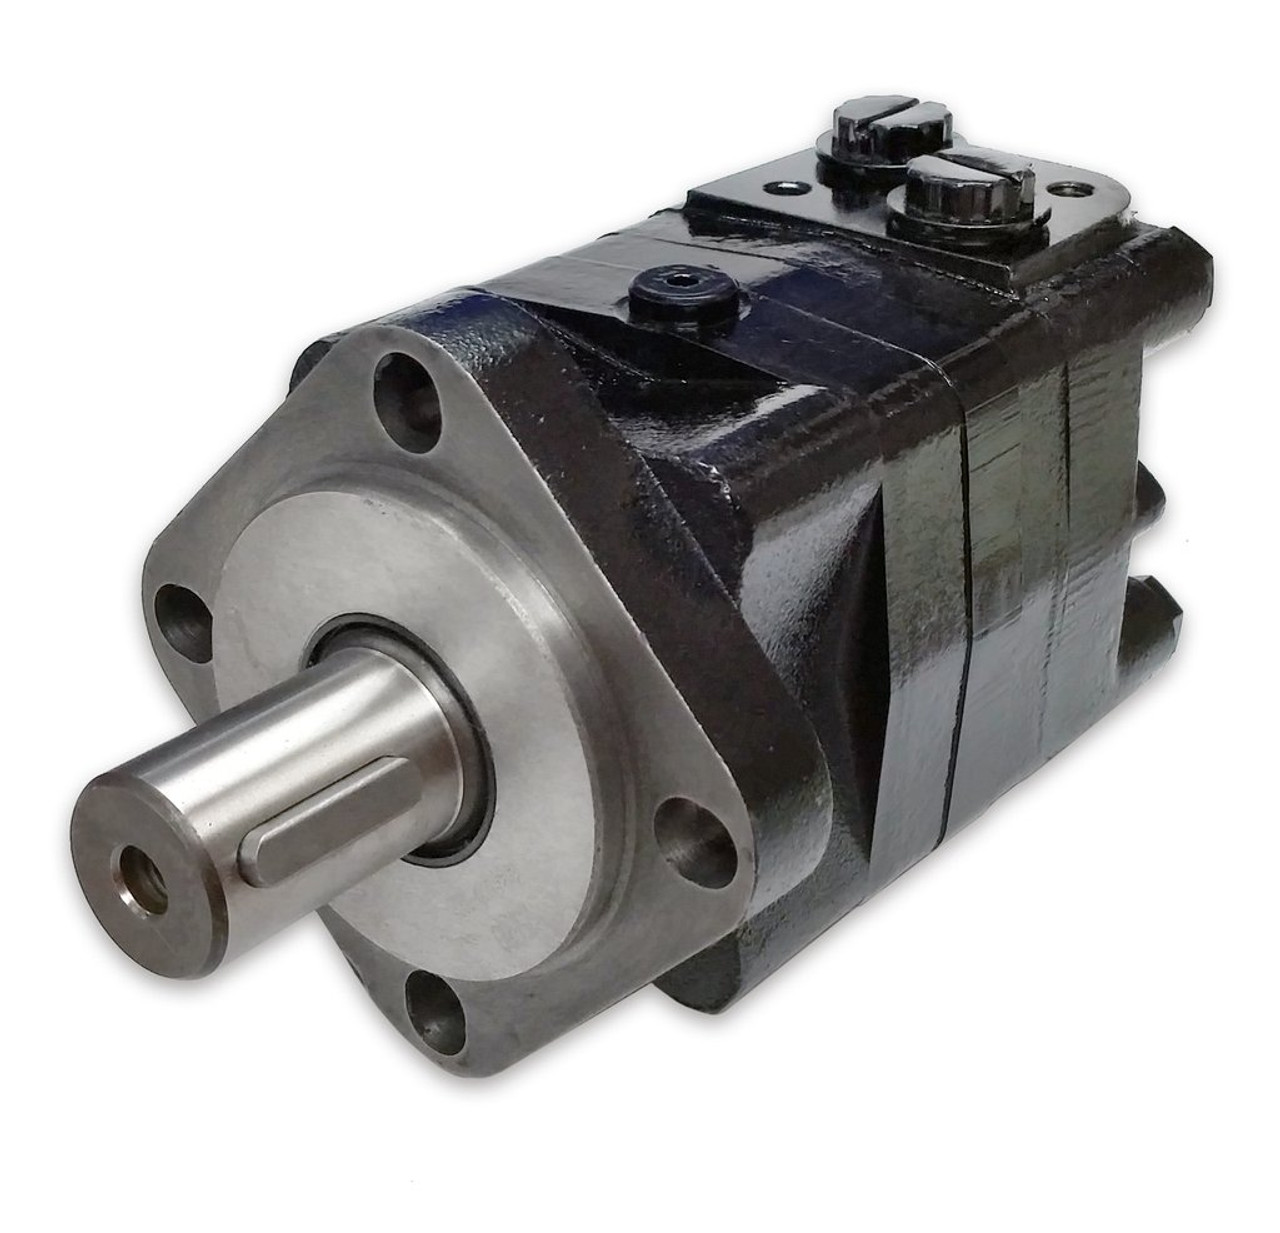 BMSY400E4DED BMSY-400-E4-D-ED Hydraulic motor LSHT 24.04 cubic inch displacement  Dynamic Fluid Components